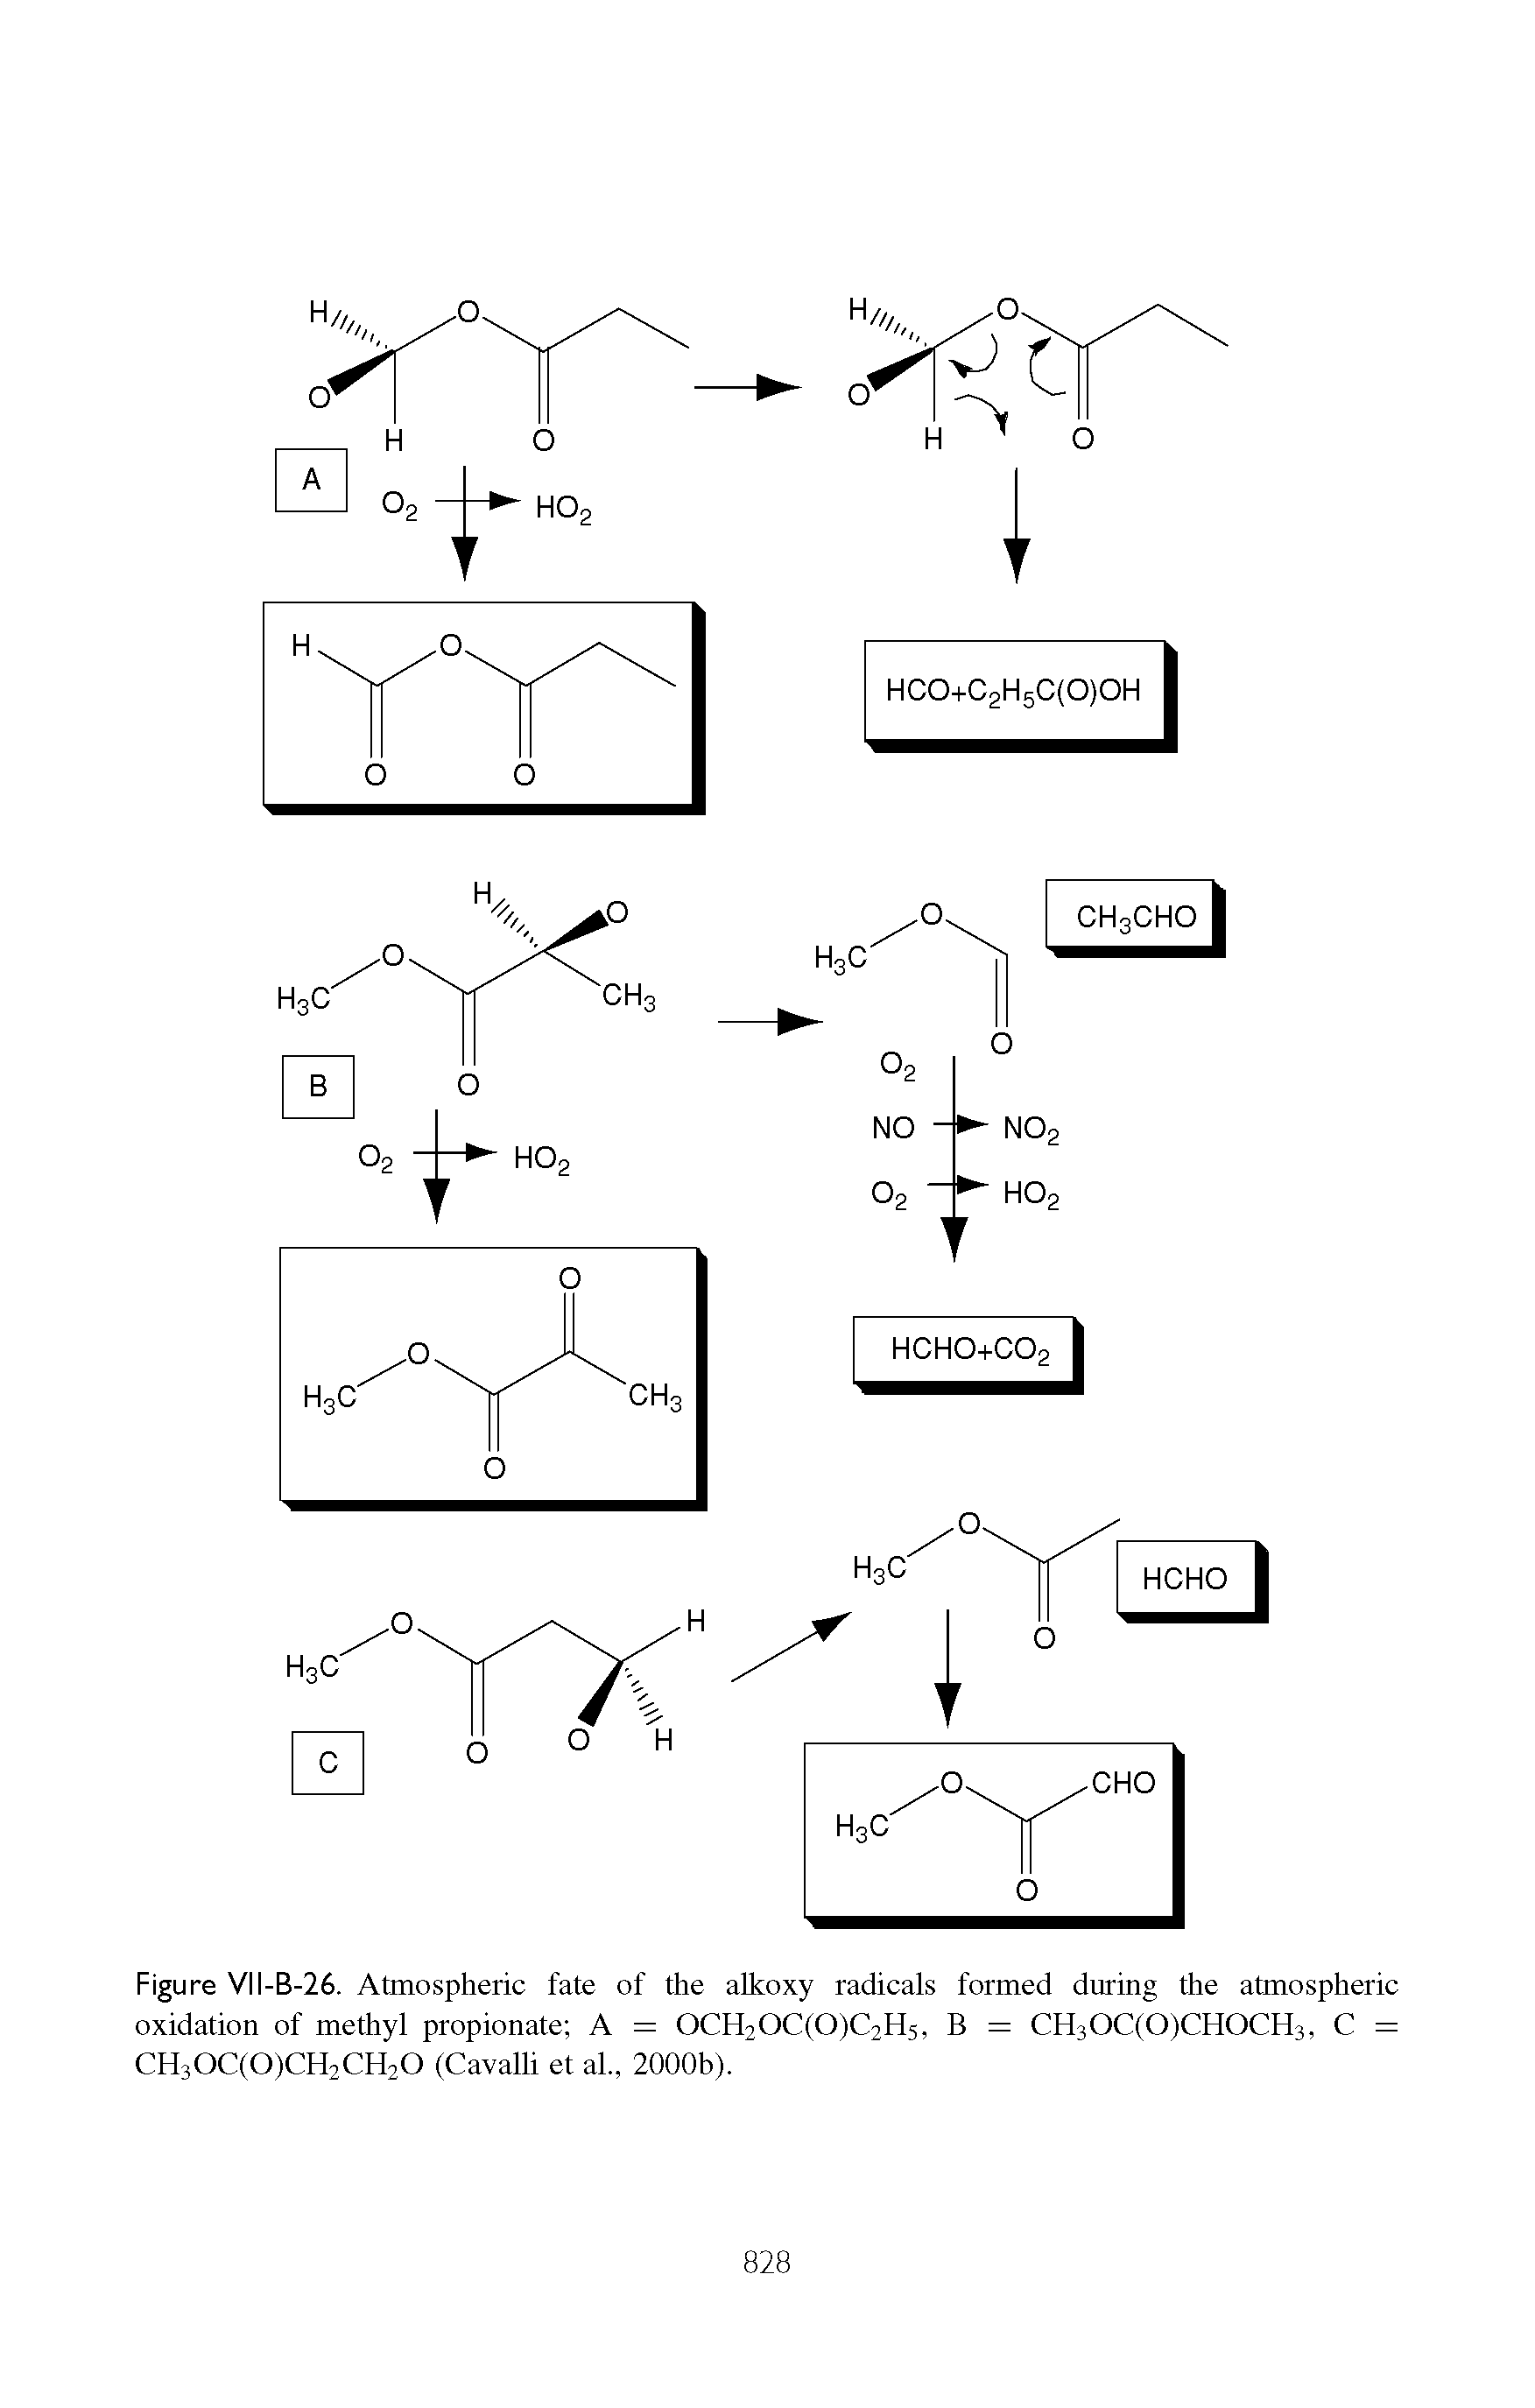 Figure VII-B-26. Atmospheric fate of the alkoxy radicals formed during the atmospheric oxidation of methyl propionate A = 0CH20C(0)C2H5, B = CH30C(0)CH0CH3, C = CH30C(0)CH2CH20 (Cavalli et ah, 2000b).